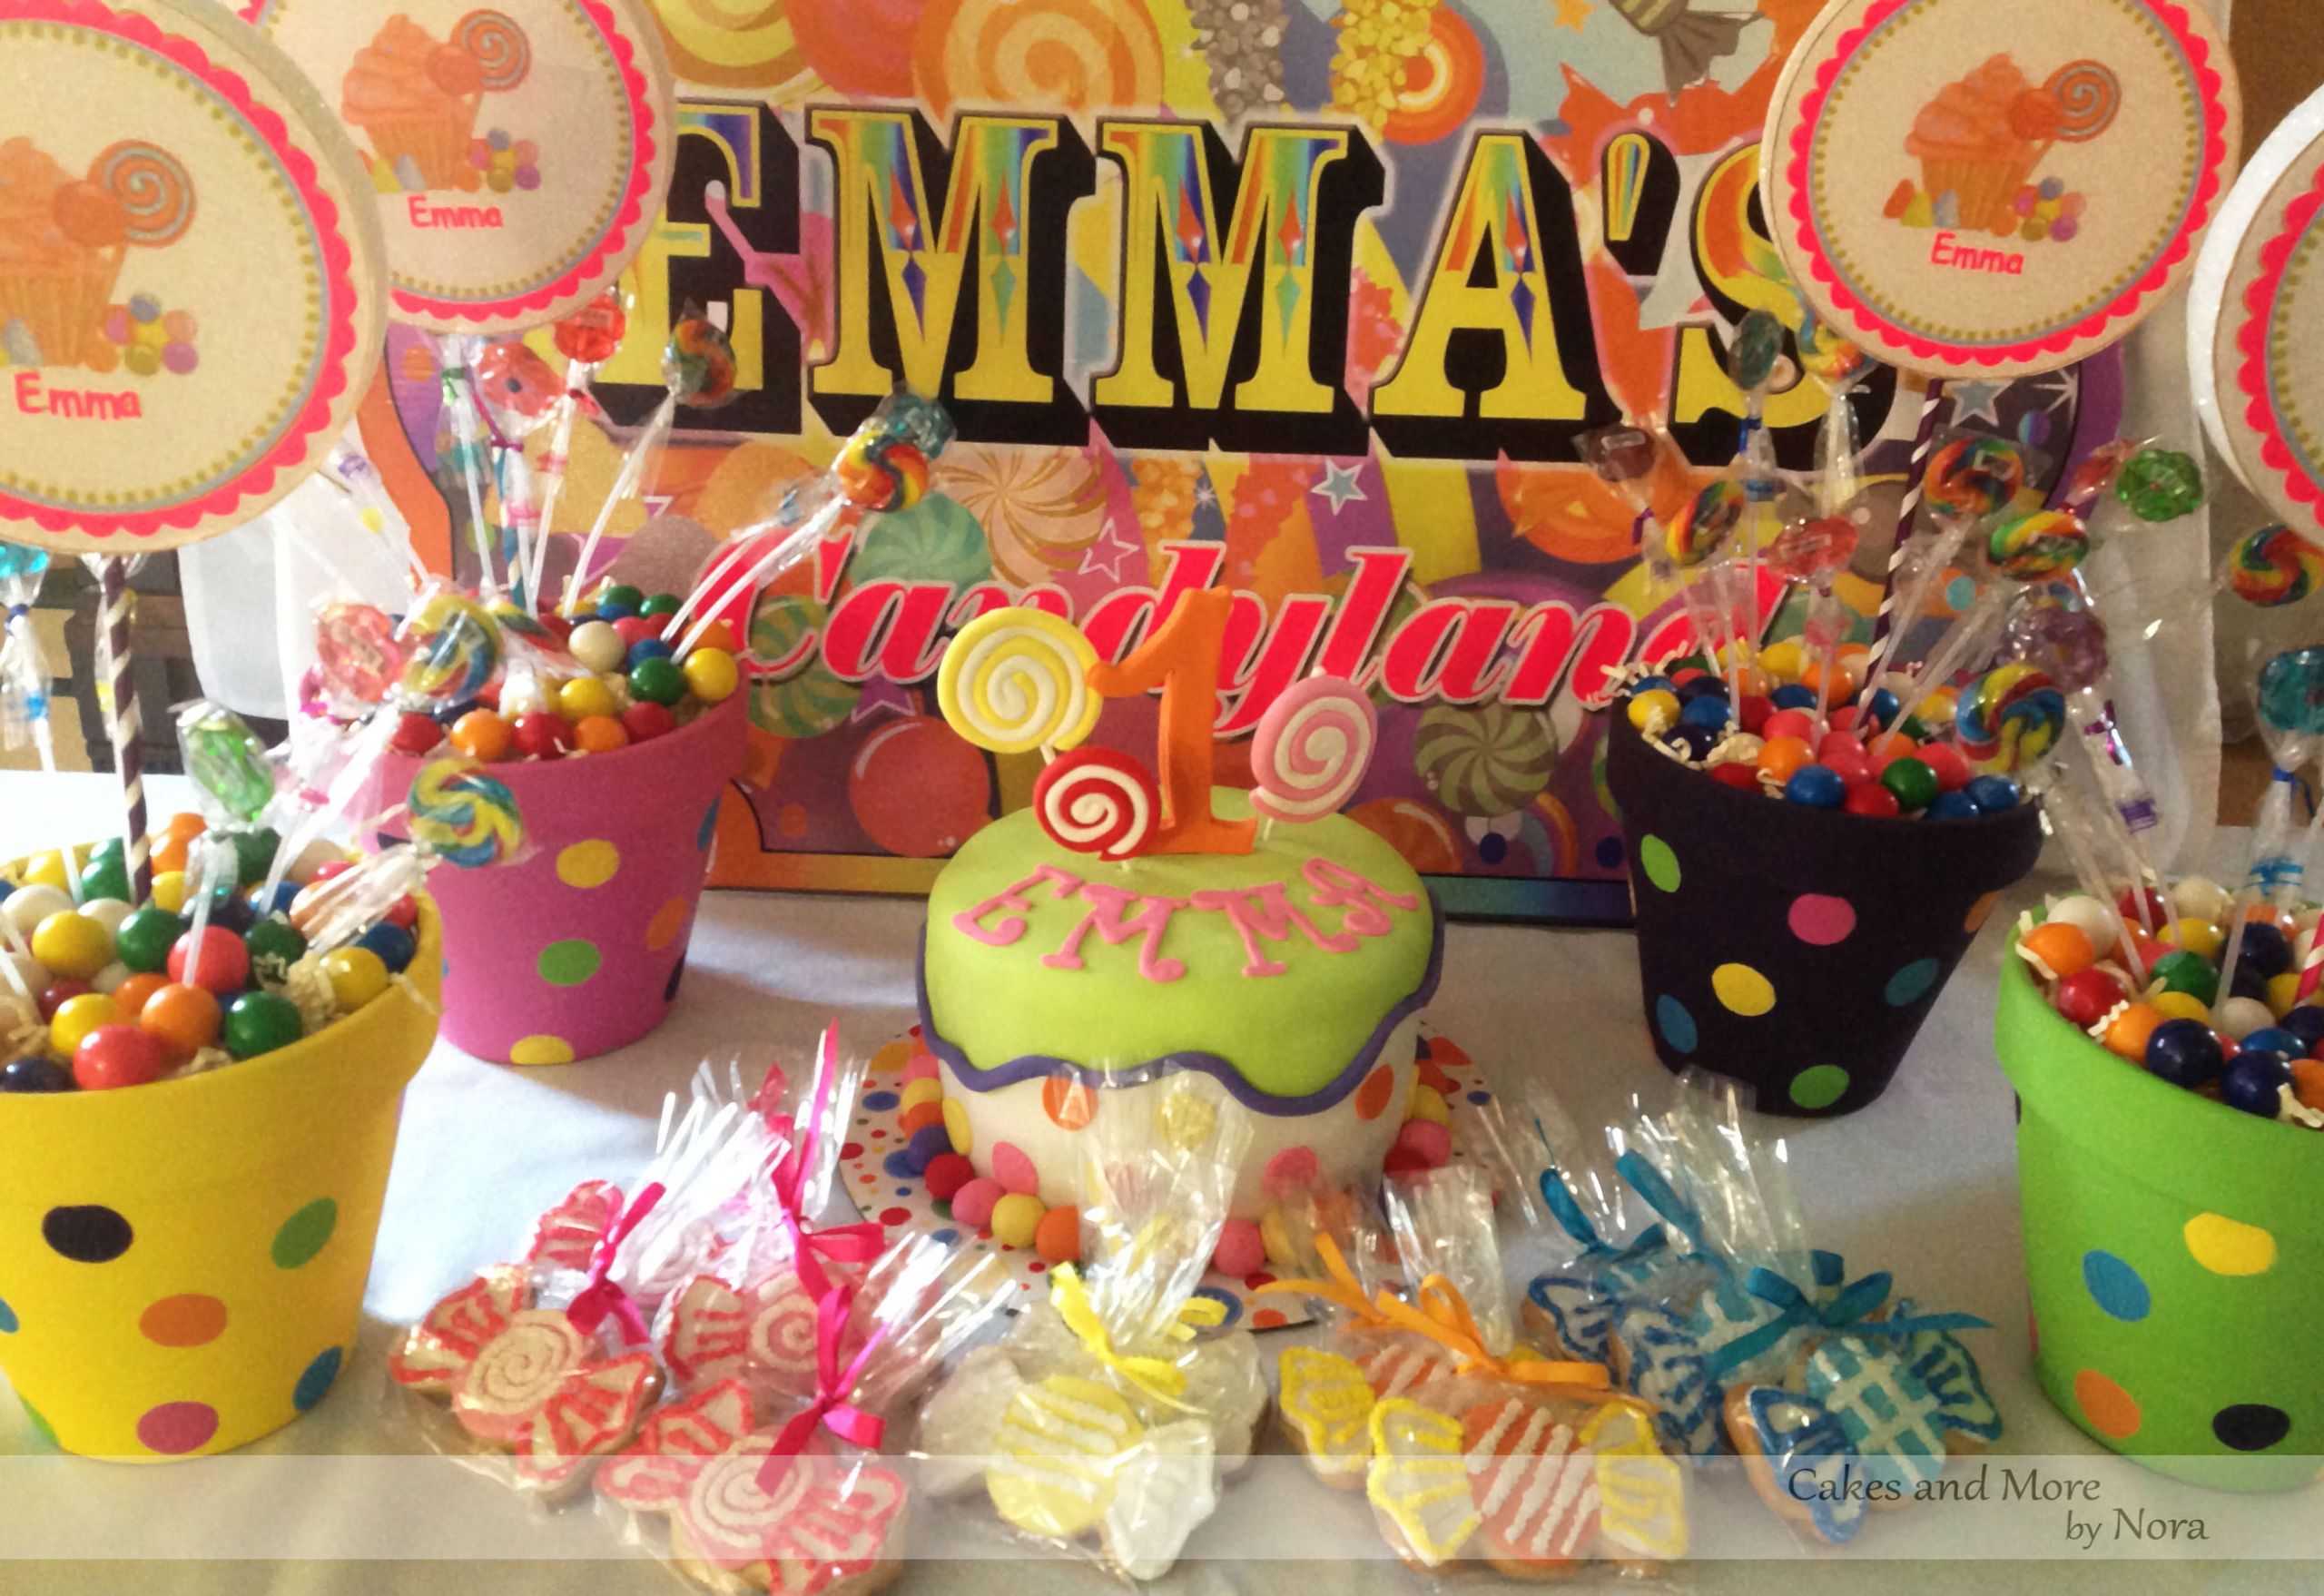 Candyland 1St Birthday Party Ideas
 Emma’s Candyland 1st Birthday Party – Cakes and More by Nora